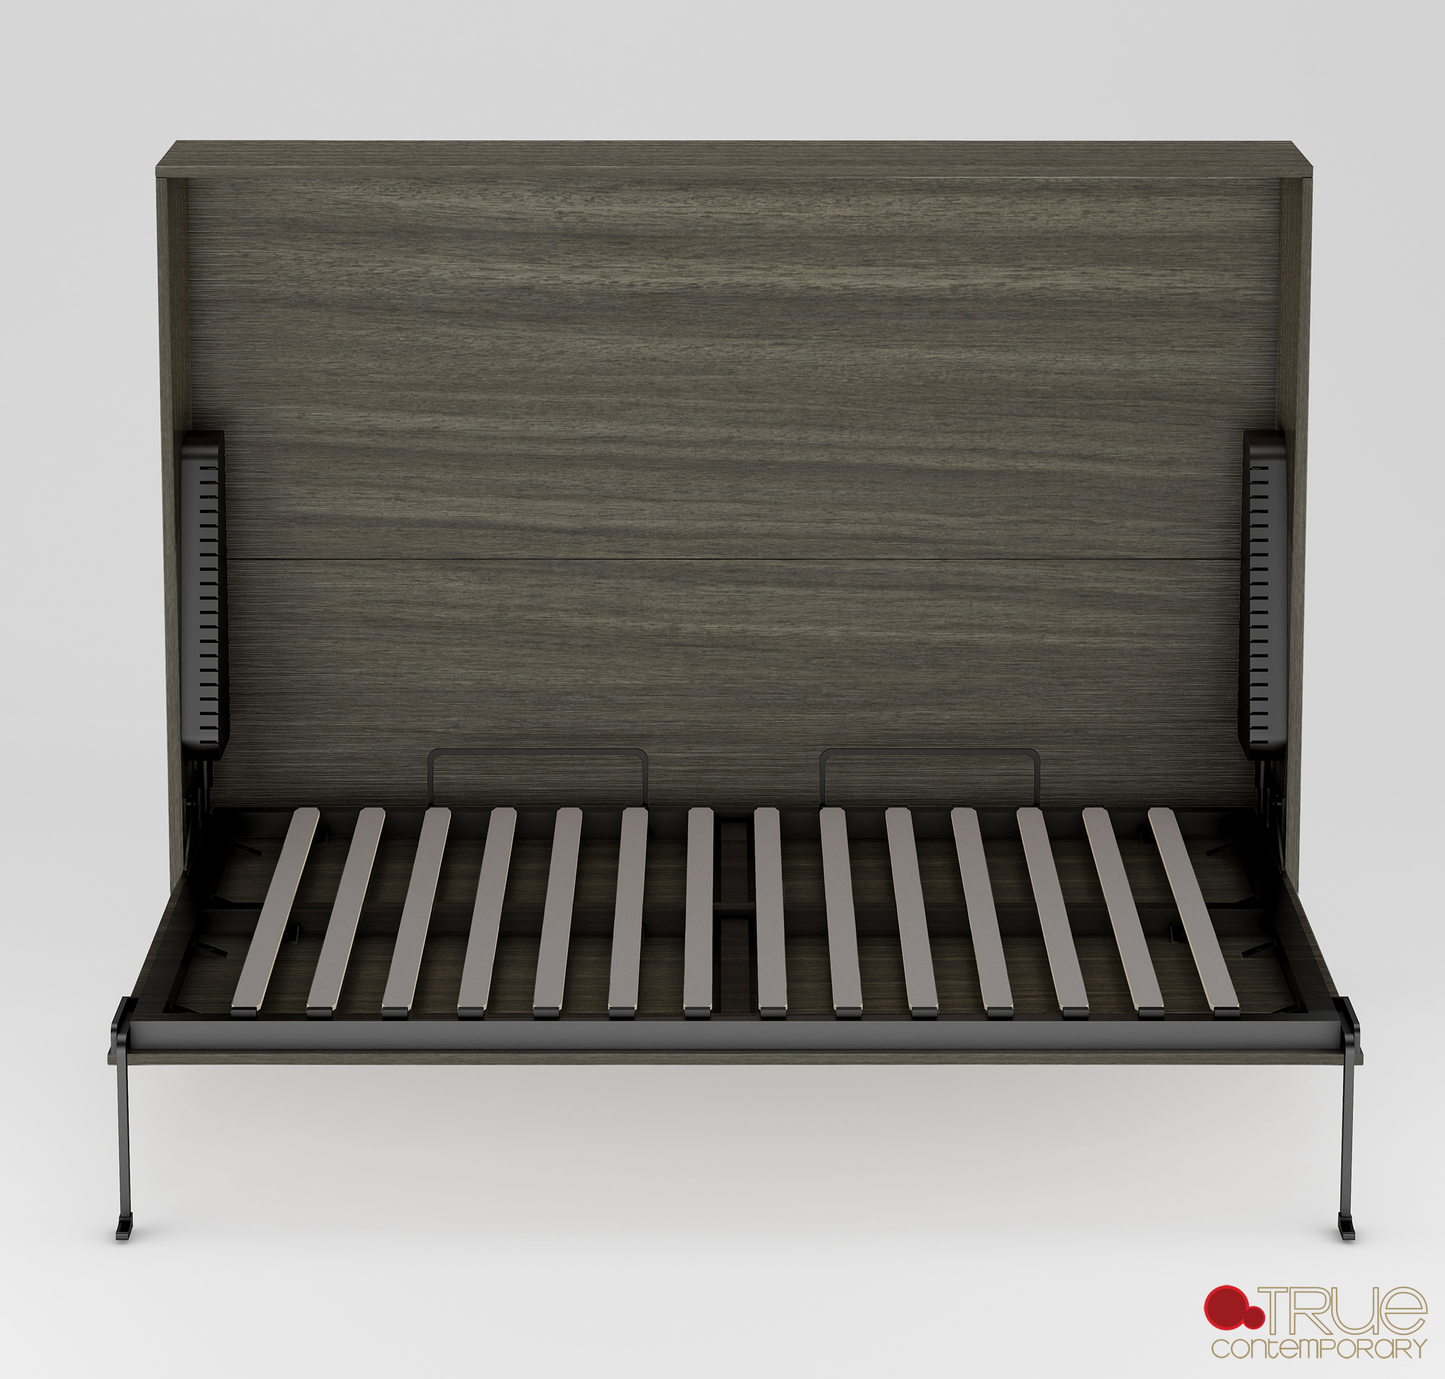 Heidi II Brown Horizontal Murphy Wall Pull Down Bed - Available in 3 Sizes